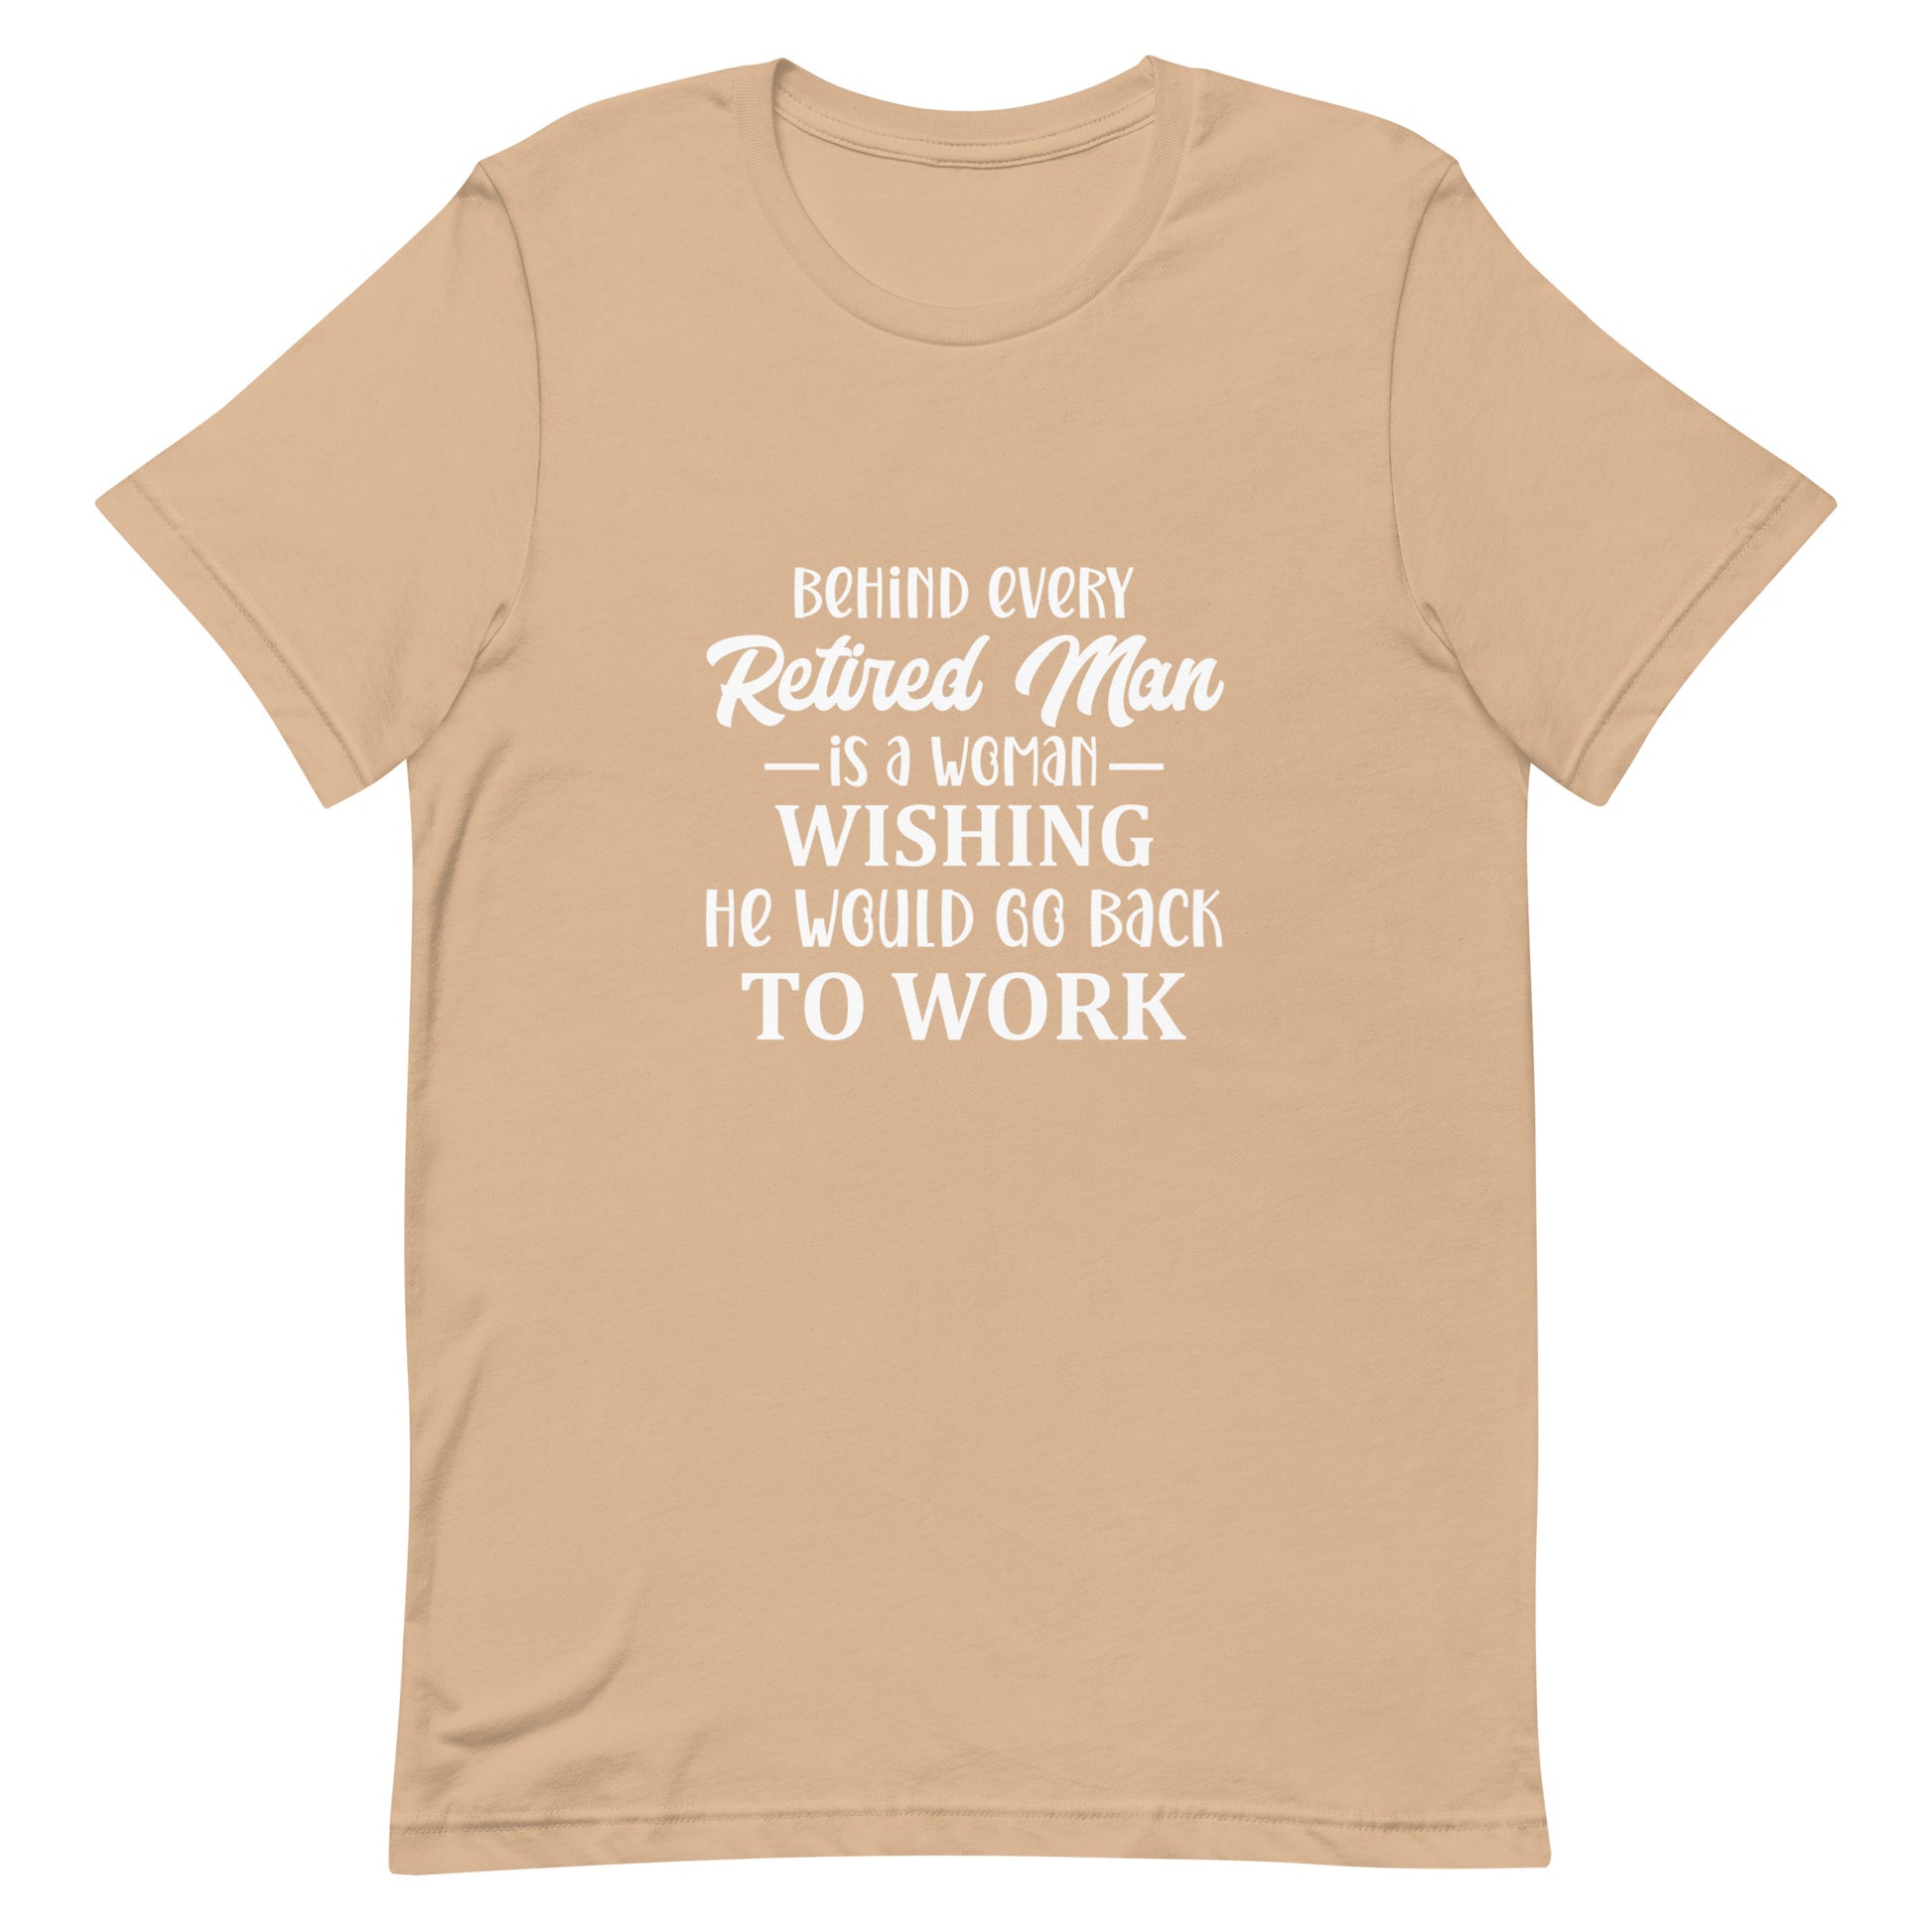 Behind Every Retired Man is a Woman Wishing He Would Go Back To Work Unisex Tshirt